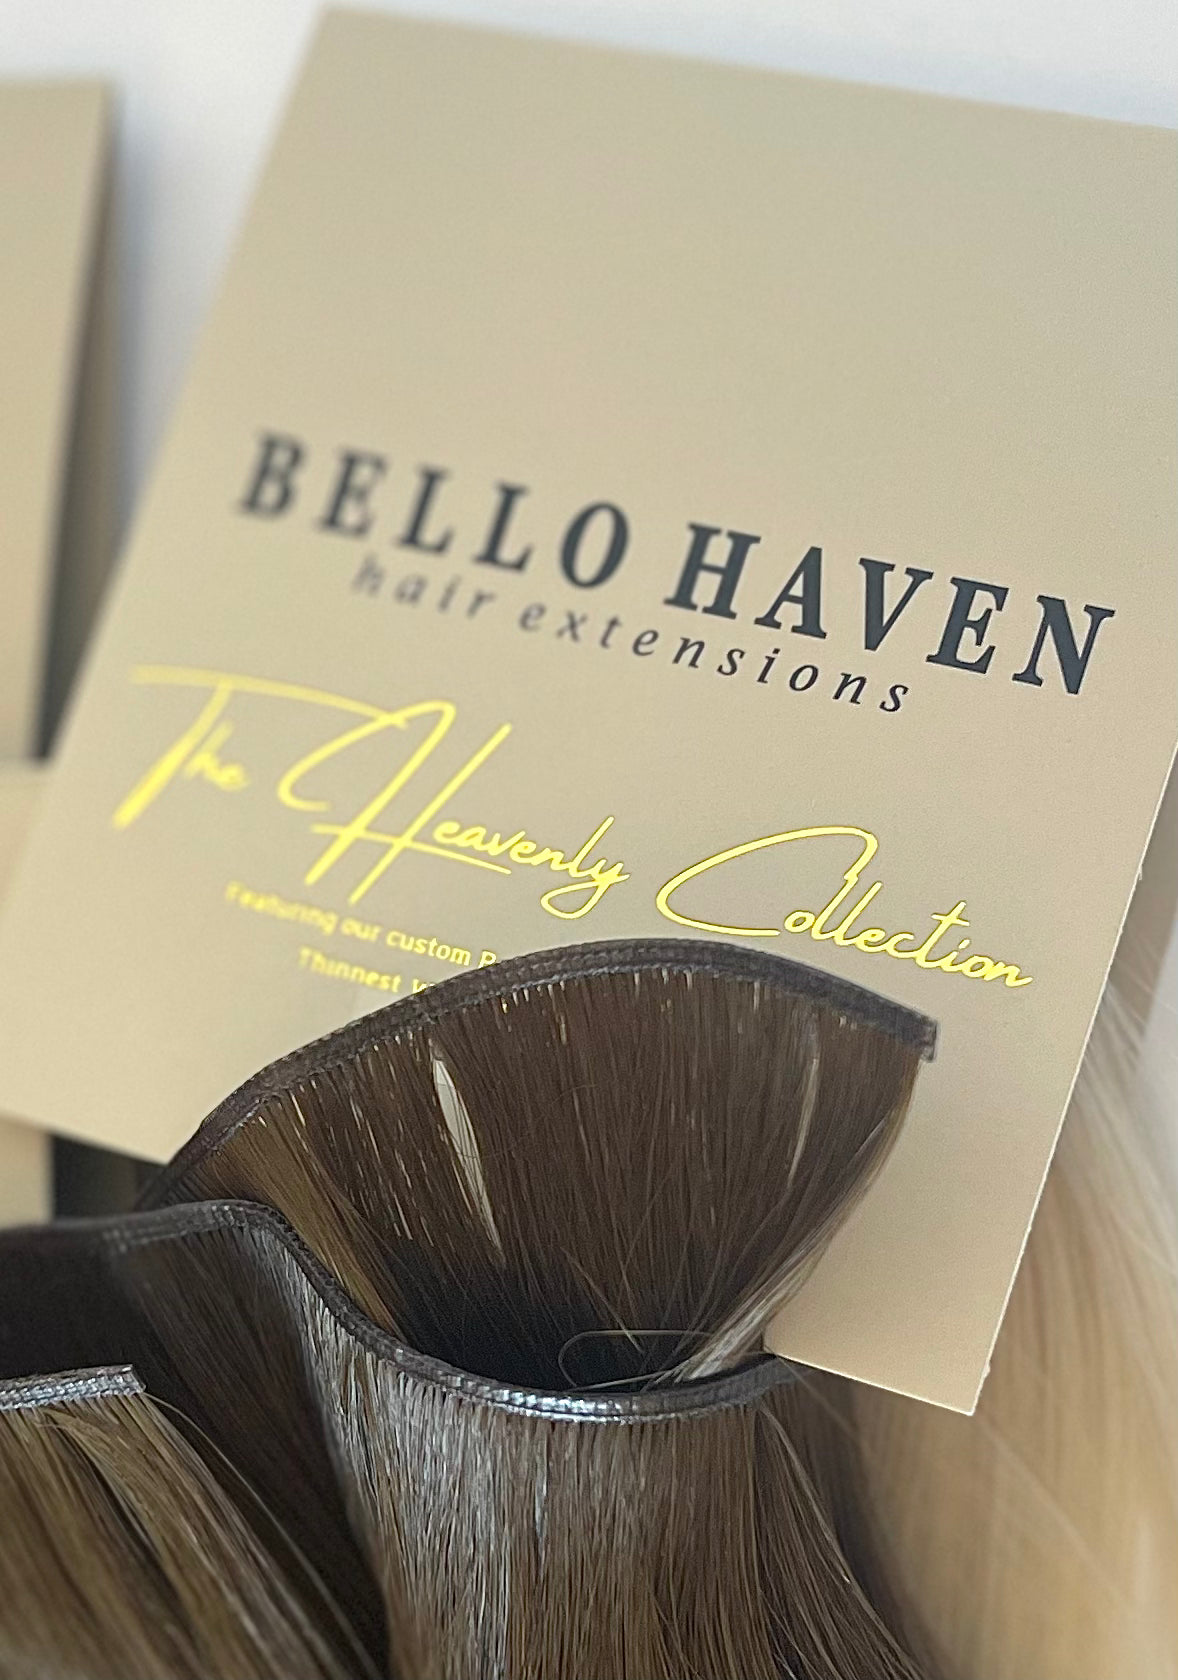 4 heavenly hair extension product